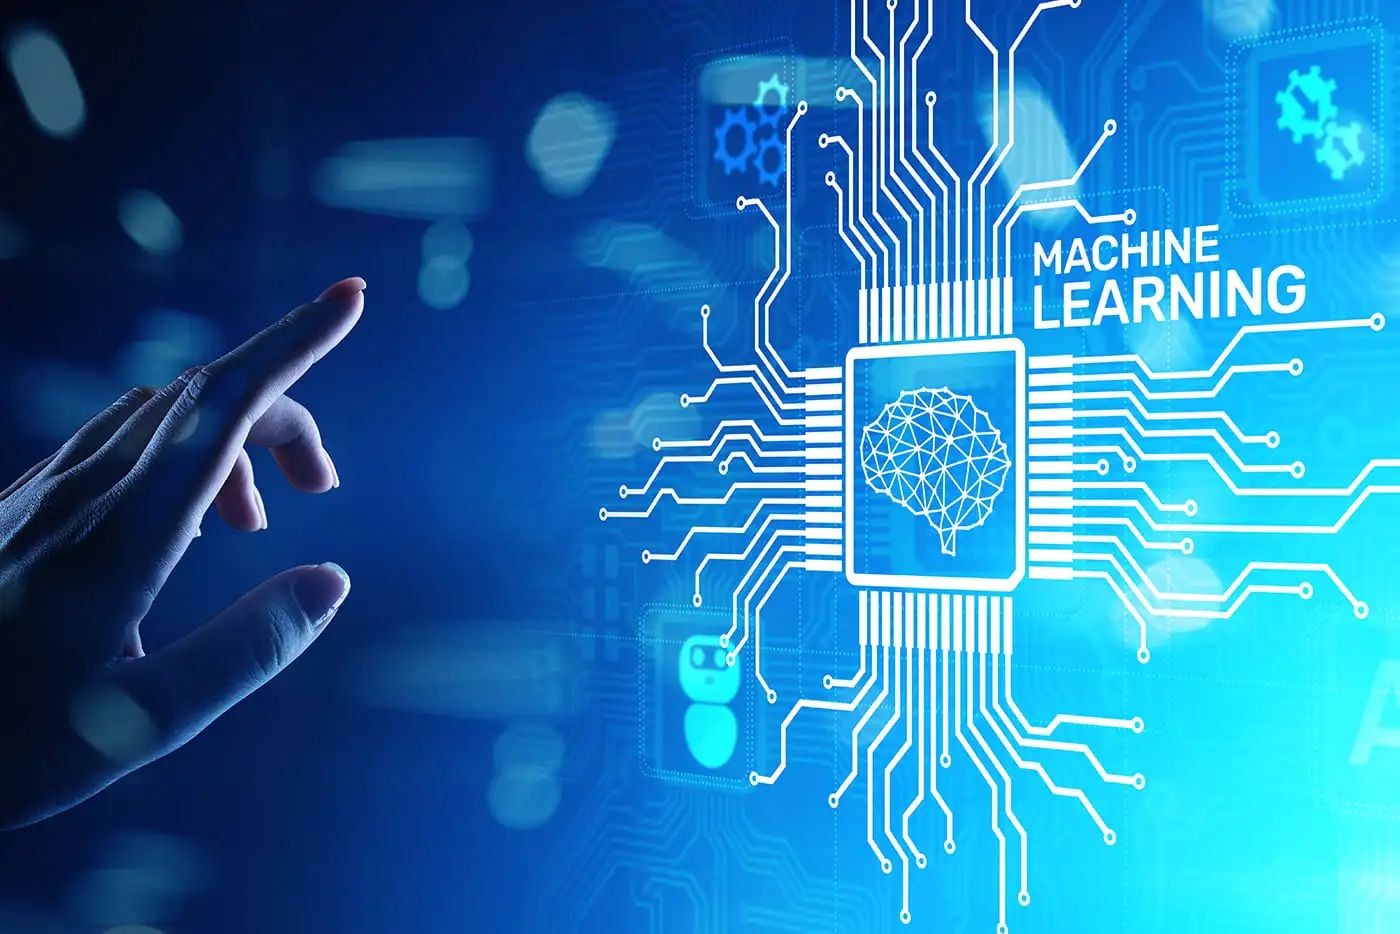 How Does Supervised Machine Learning Work?